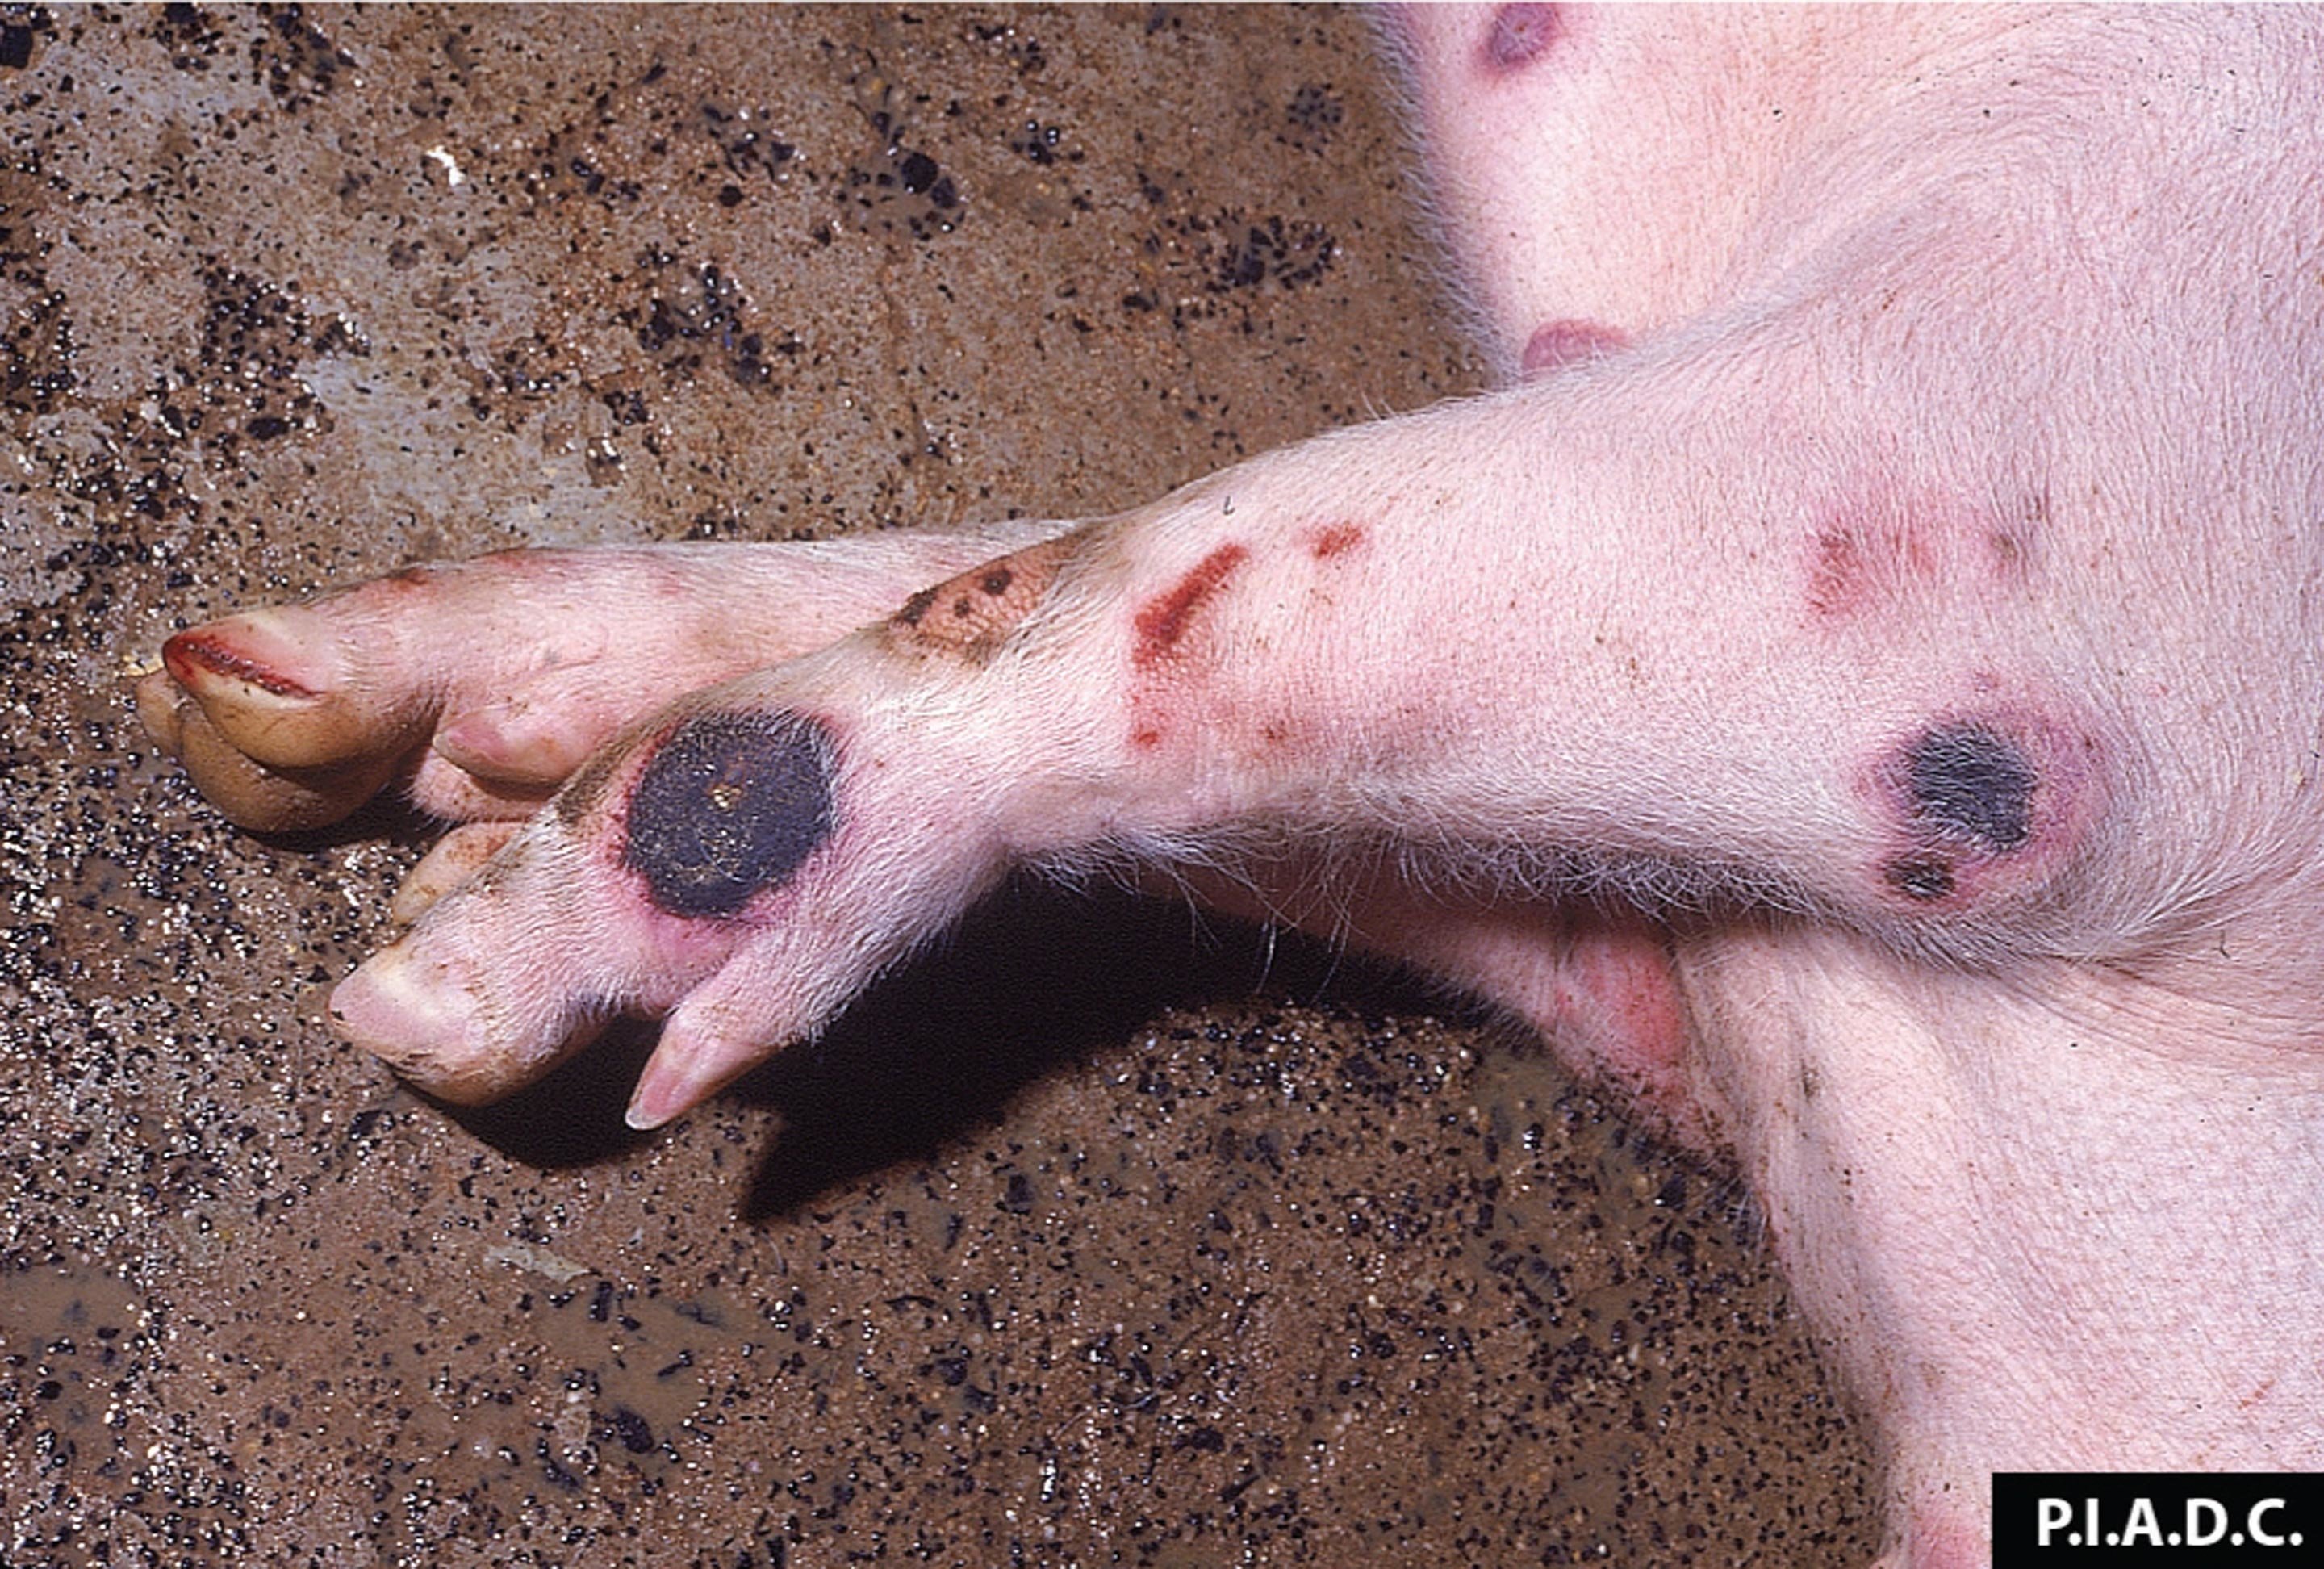 A pig's limbs with ASF lesions